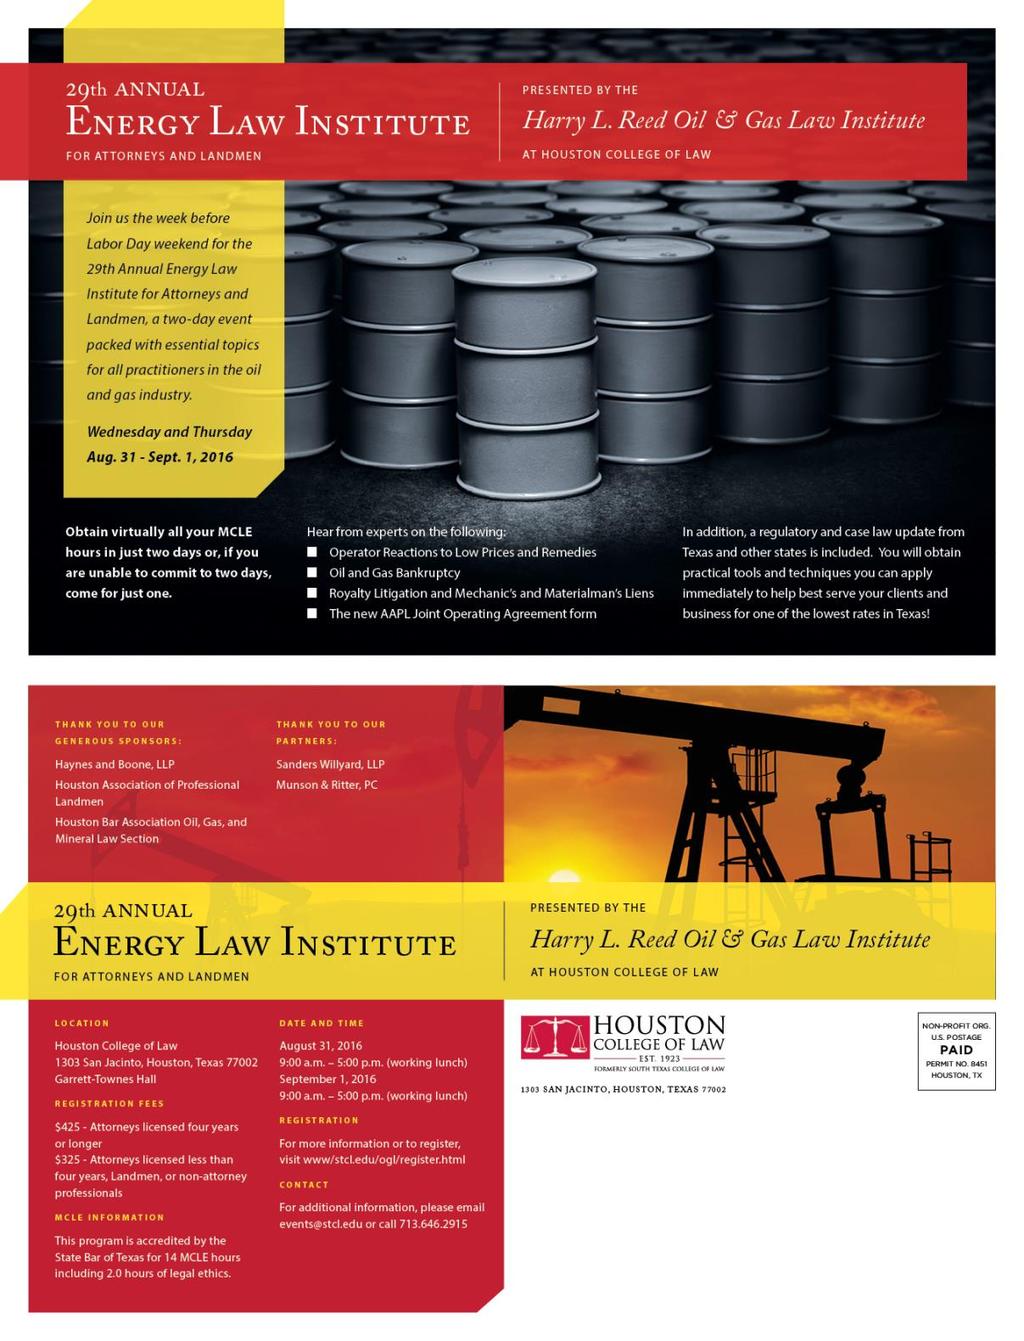 30 th Annual Energy Law Institute for Attorneys and Landmen -The Institute s